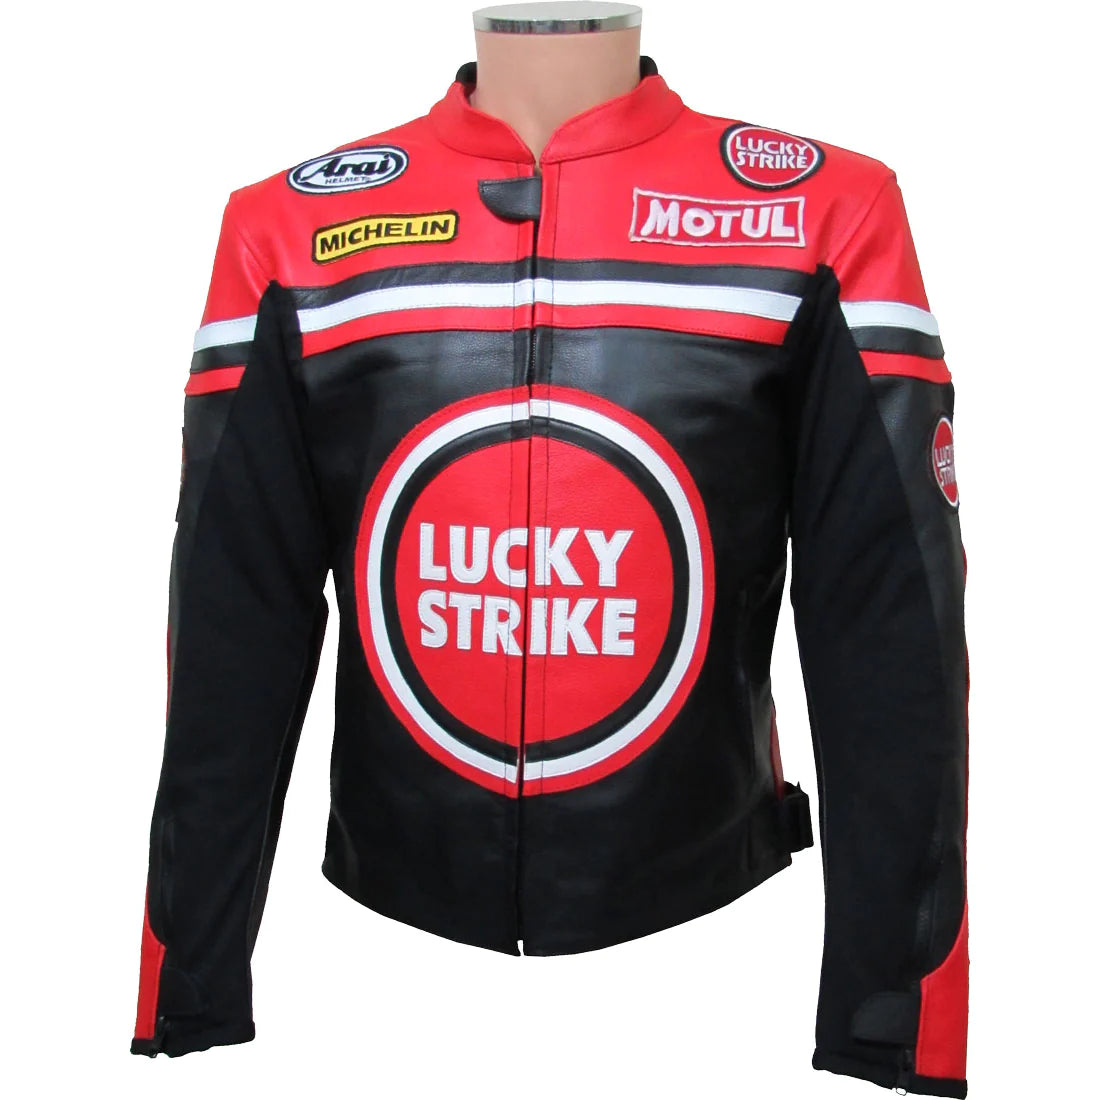 lucky-strike-red-black-leather-motorcycle-jacket-front